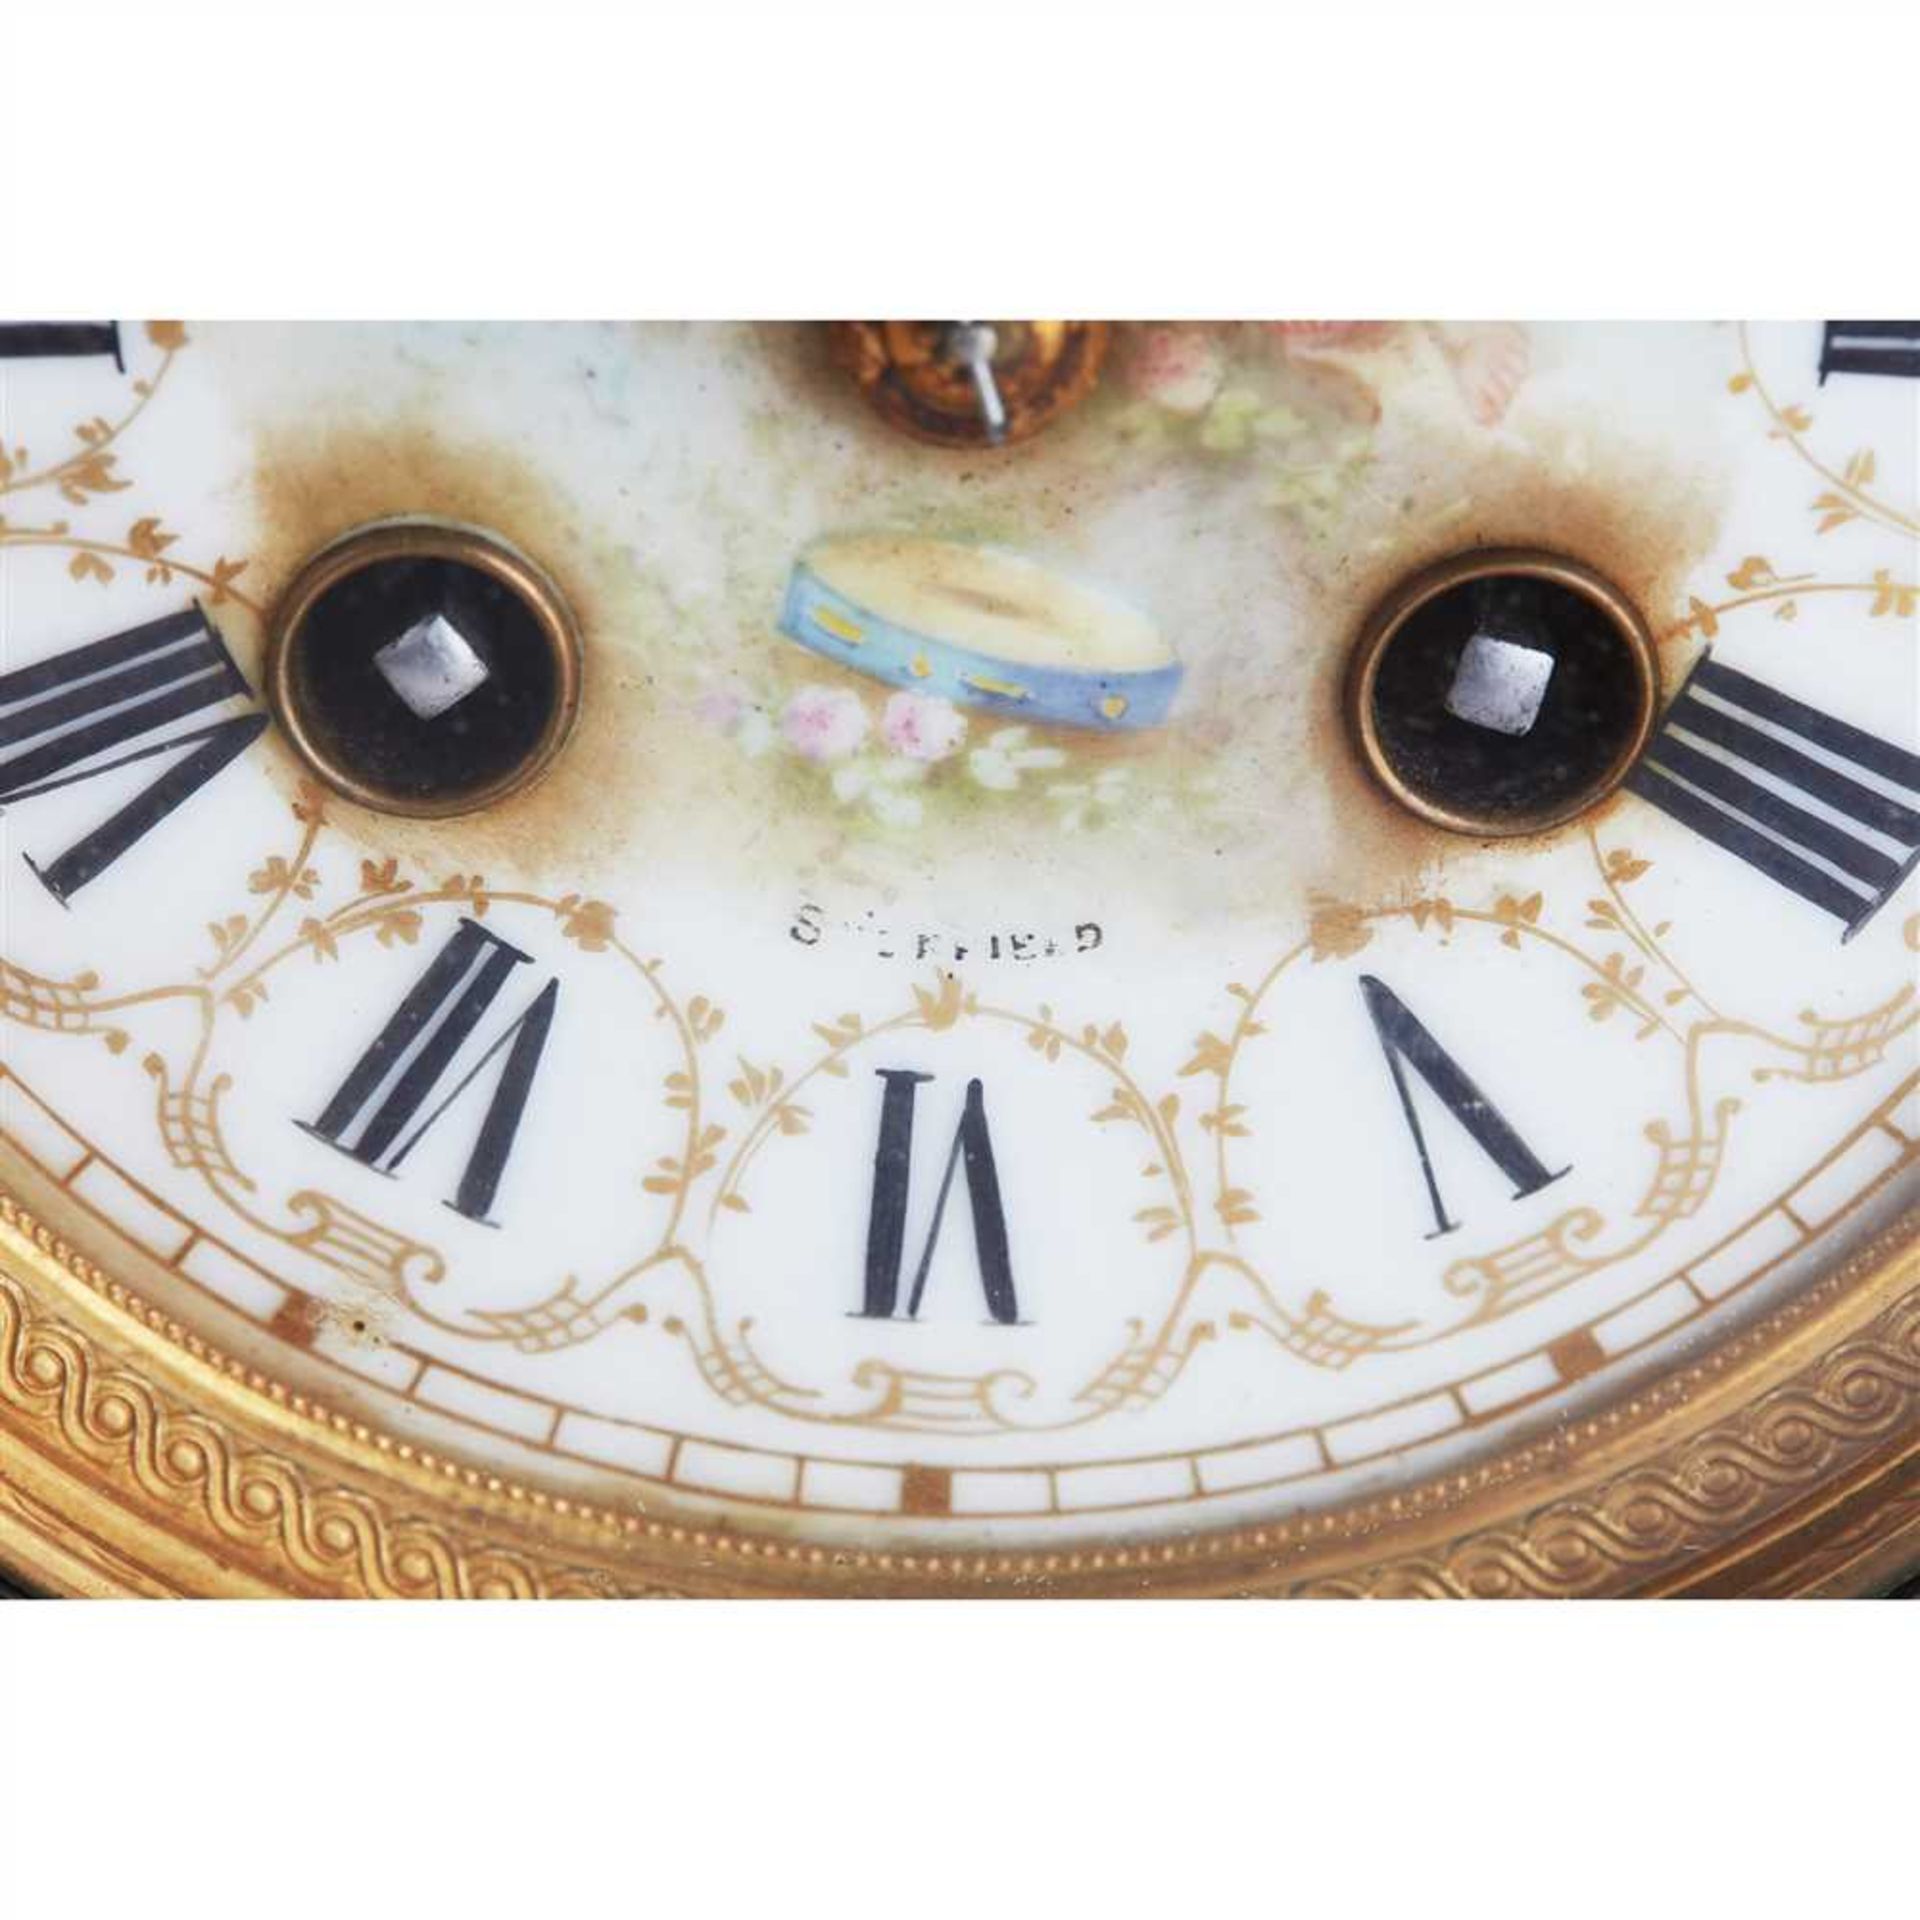 FRENCH CHAMPLEVÉ ENAMEL MANTEL CLOCK LATE 19TH CENTURY - Image 4 of 7